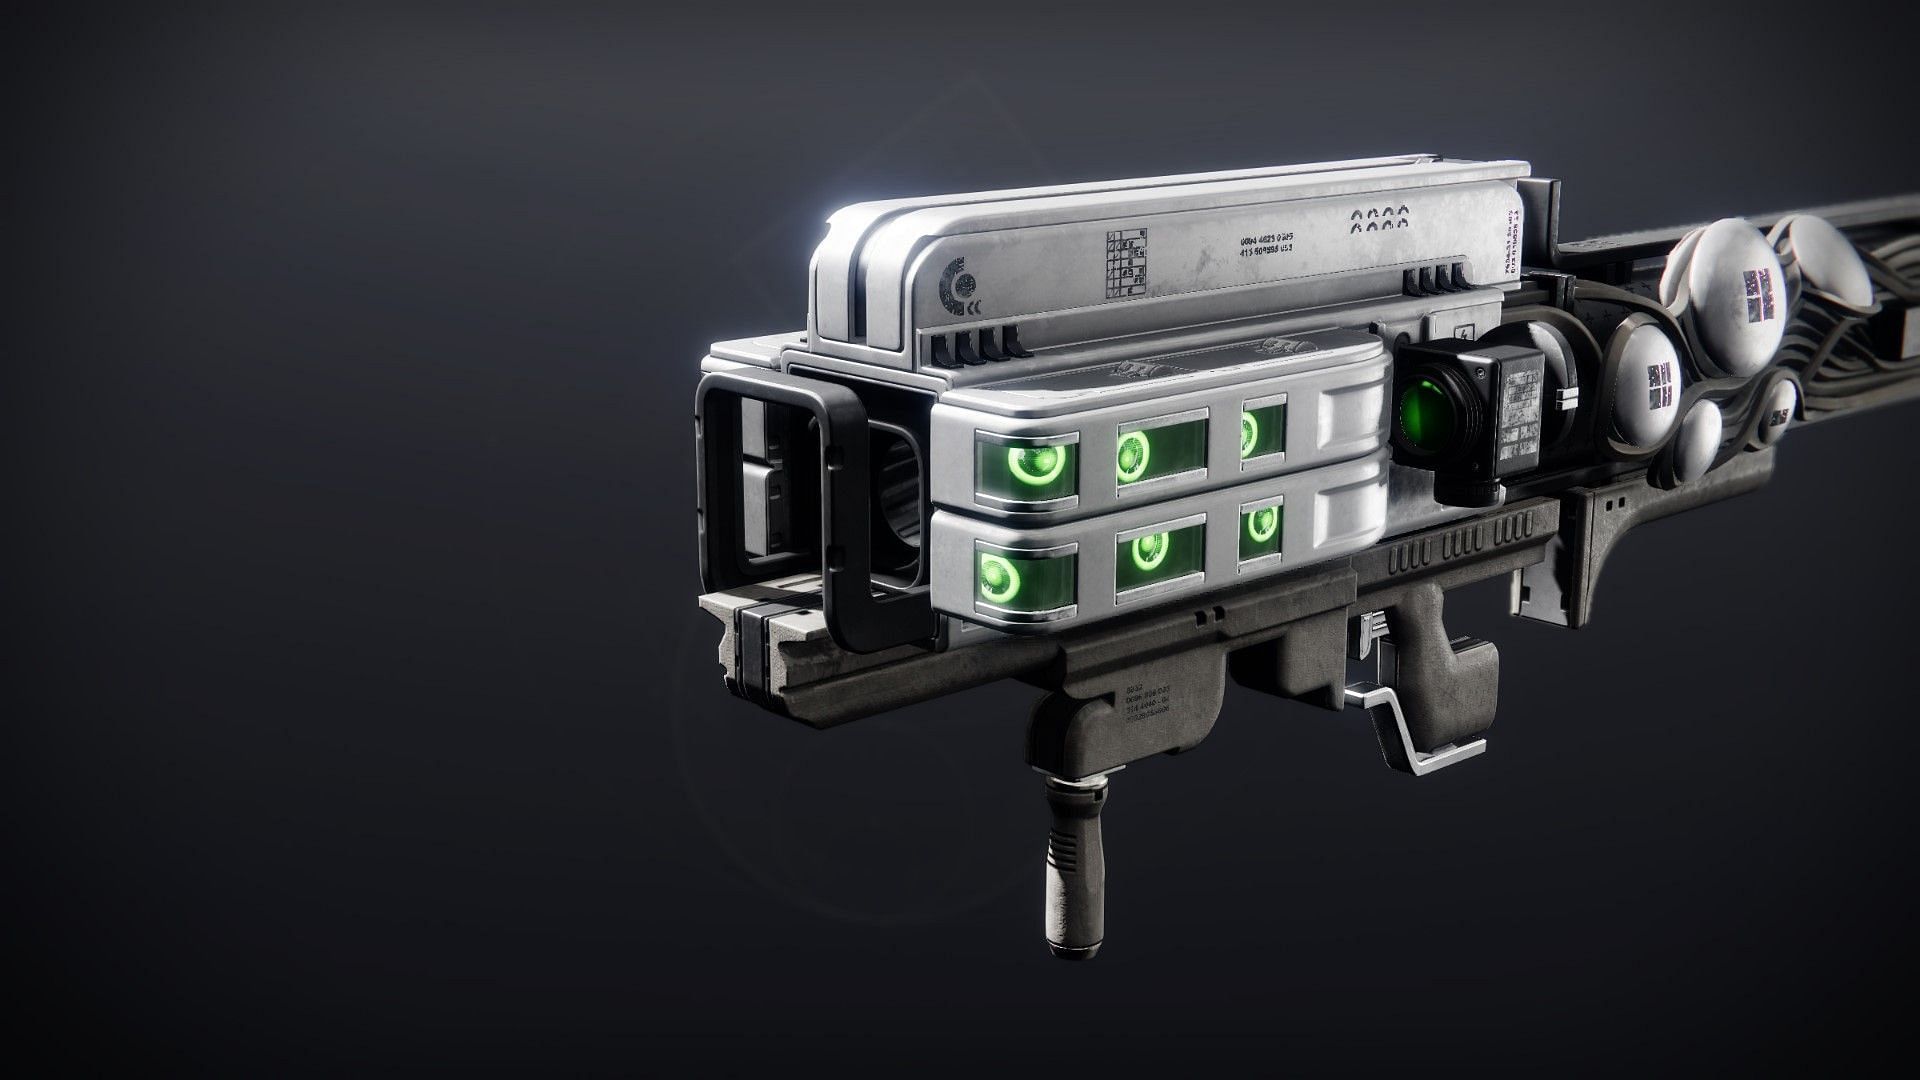 The Eyes of Tomorrow is a Solar power weapon in Destiny 2 (Image via Bungie)